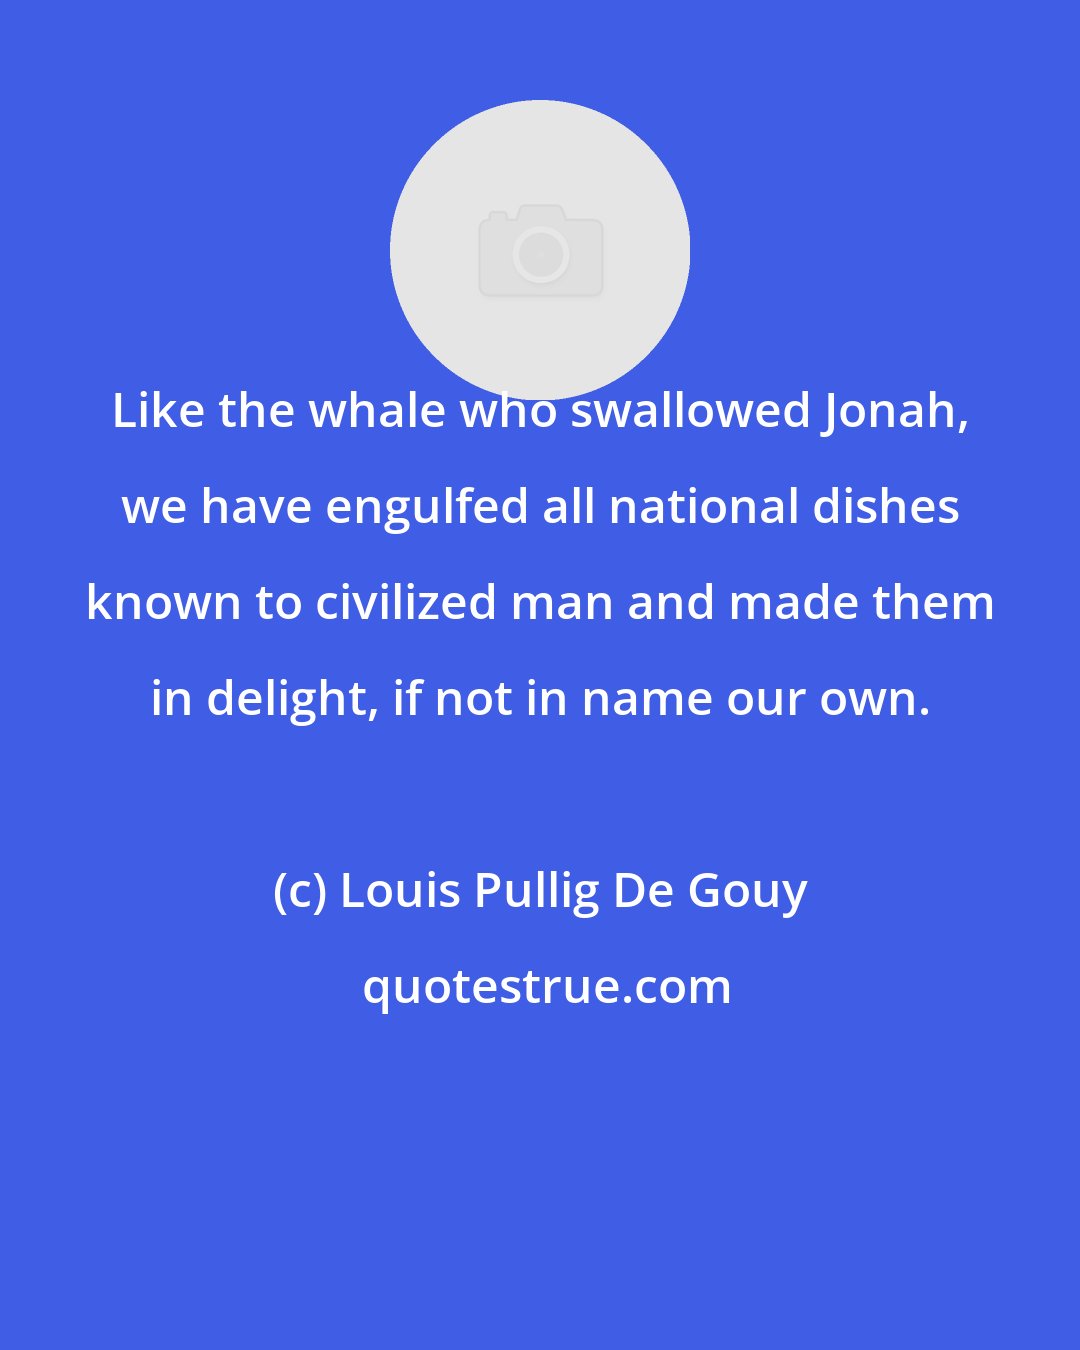 Louis Pullig De Gouy: Like the whale who swallowed Jonah, we have engulfed all national dishes known to civilized man and made them in delight, if not in name our own.